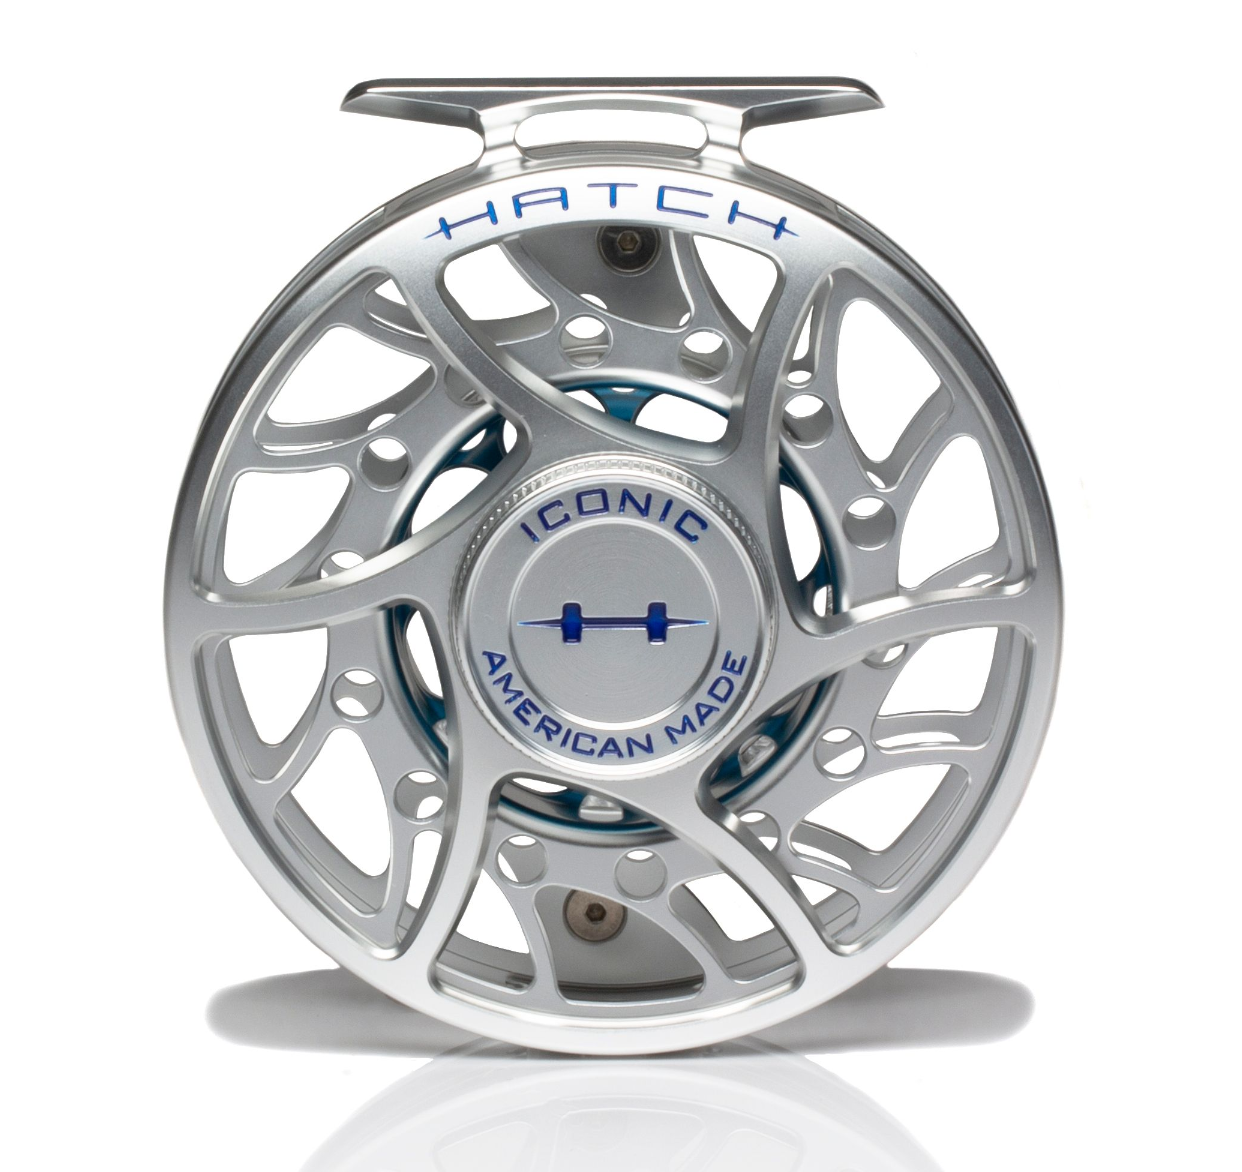 Hatch Iconic 11 Plus Saltwater Fly Reels